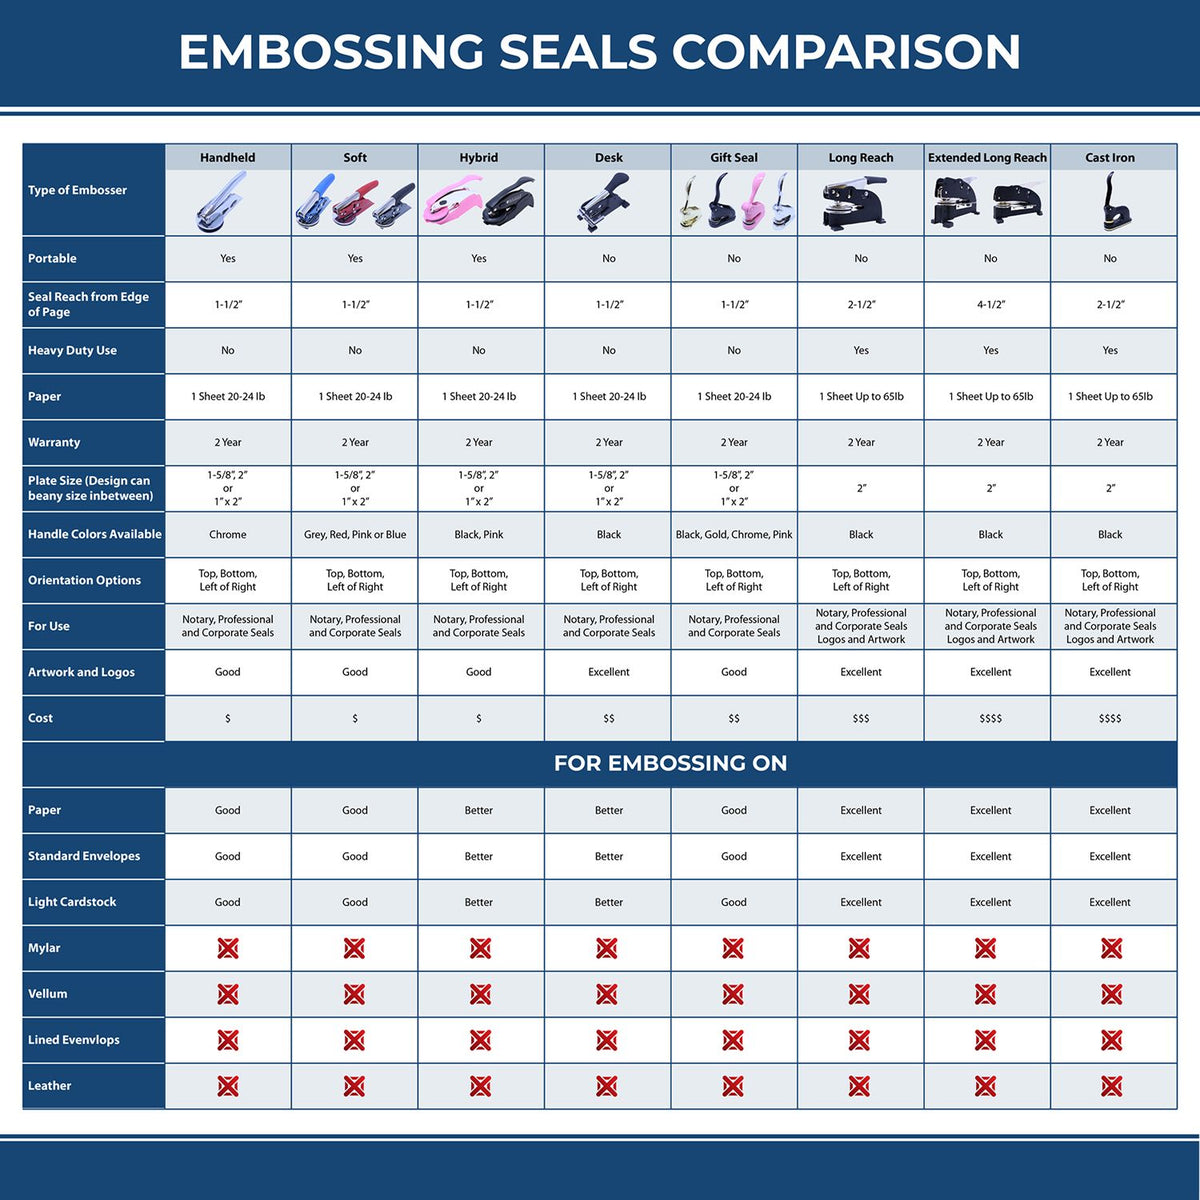 A comparison chart for the different types of mount models available for the Soft Iowa Professional Engineer Seal.